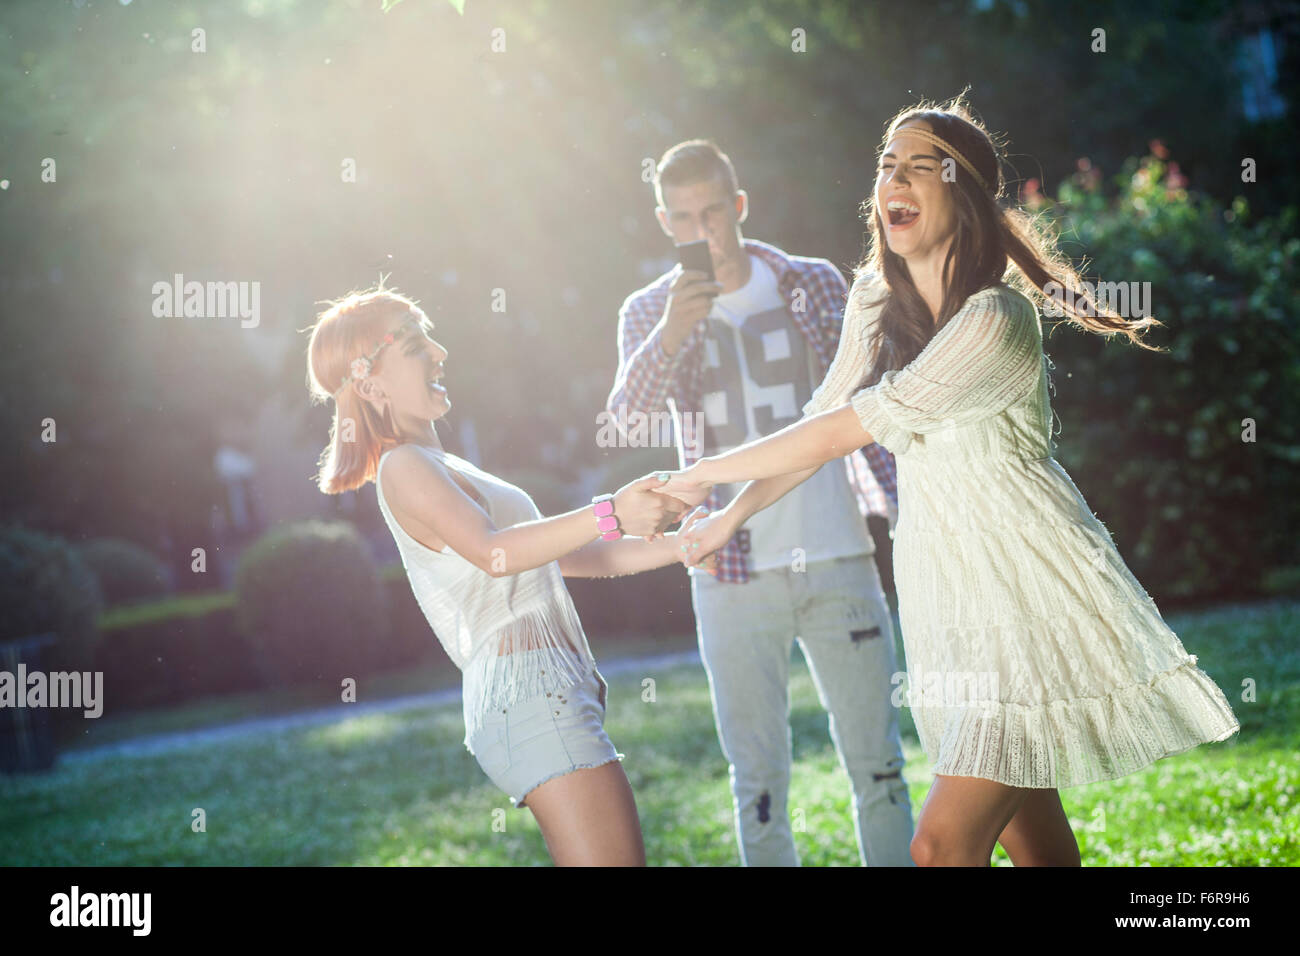 Young people in hippie style fashion dancing in city park Stock Photo